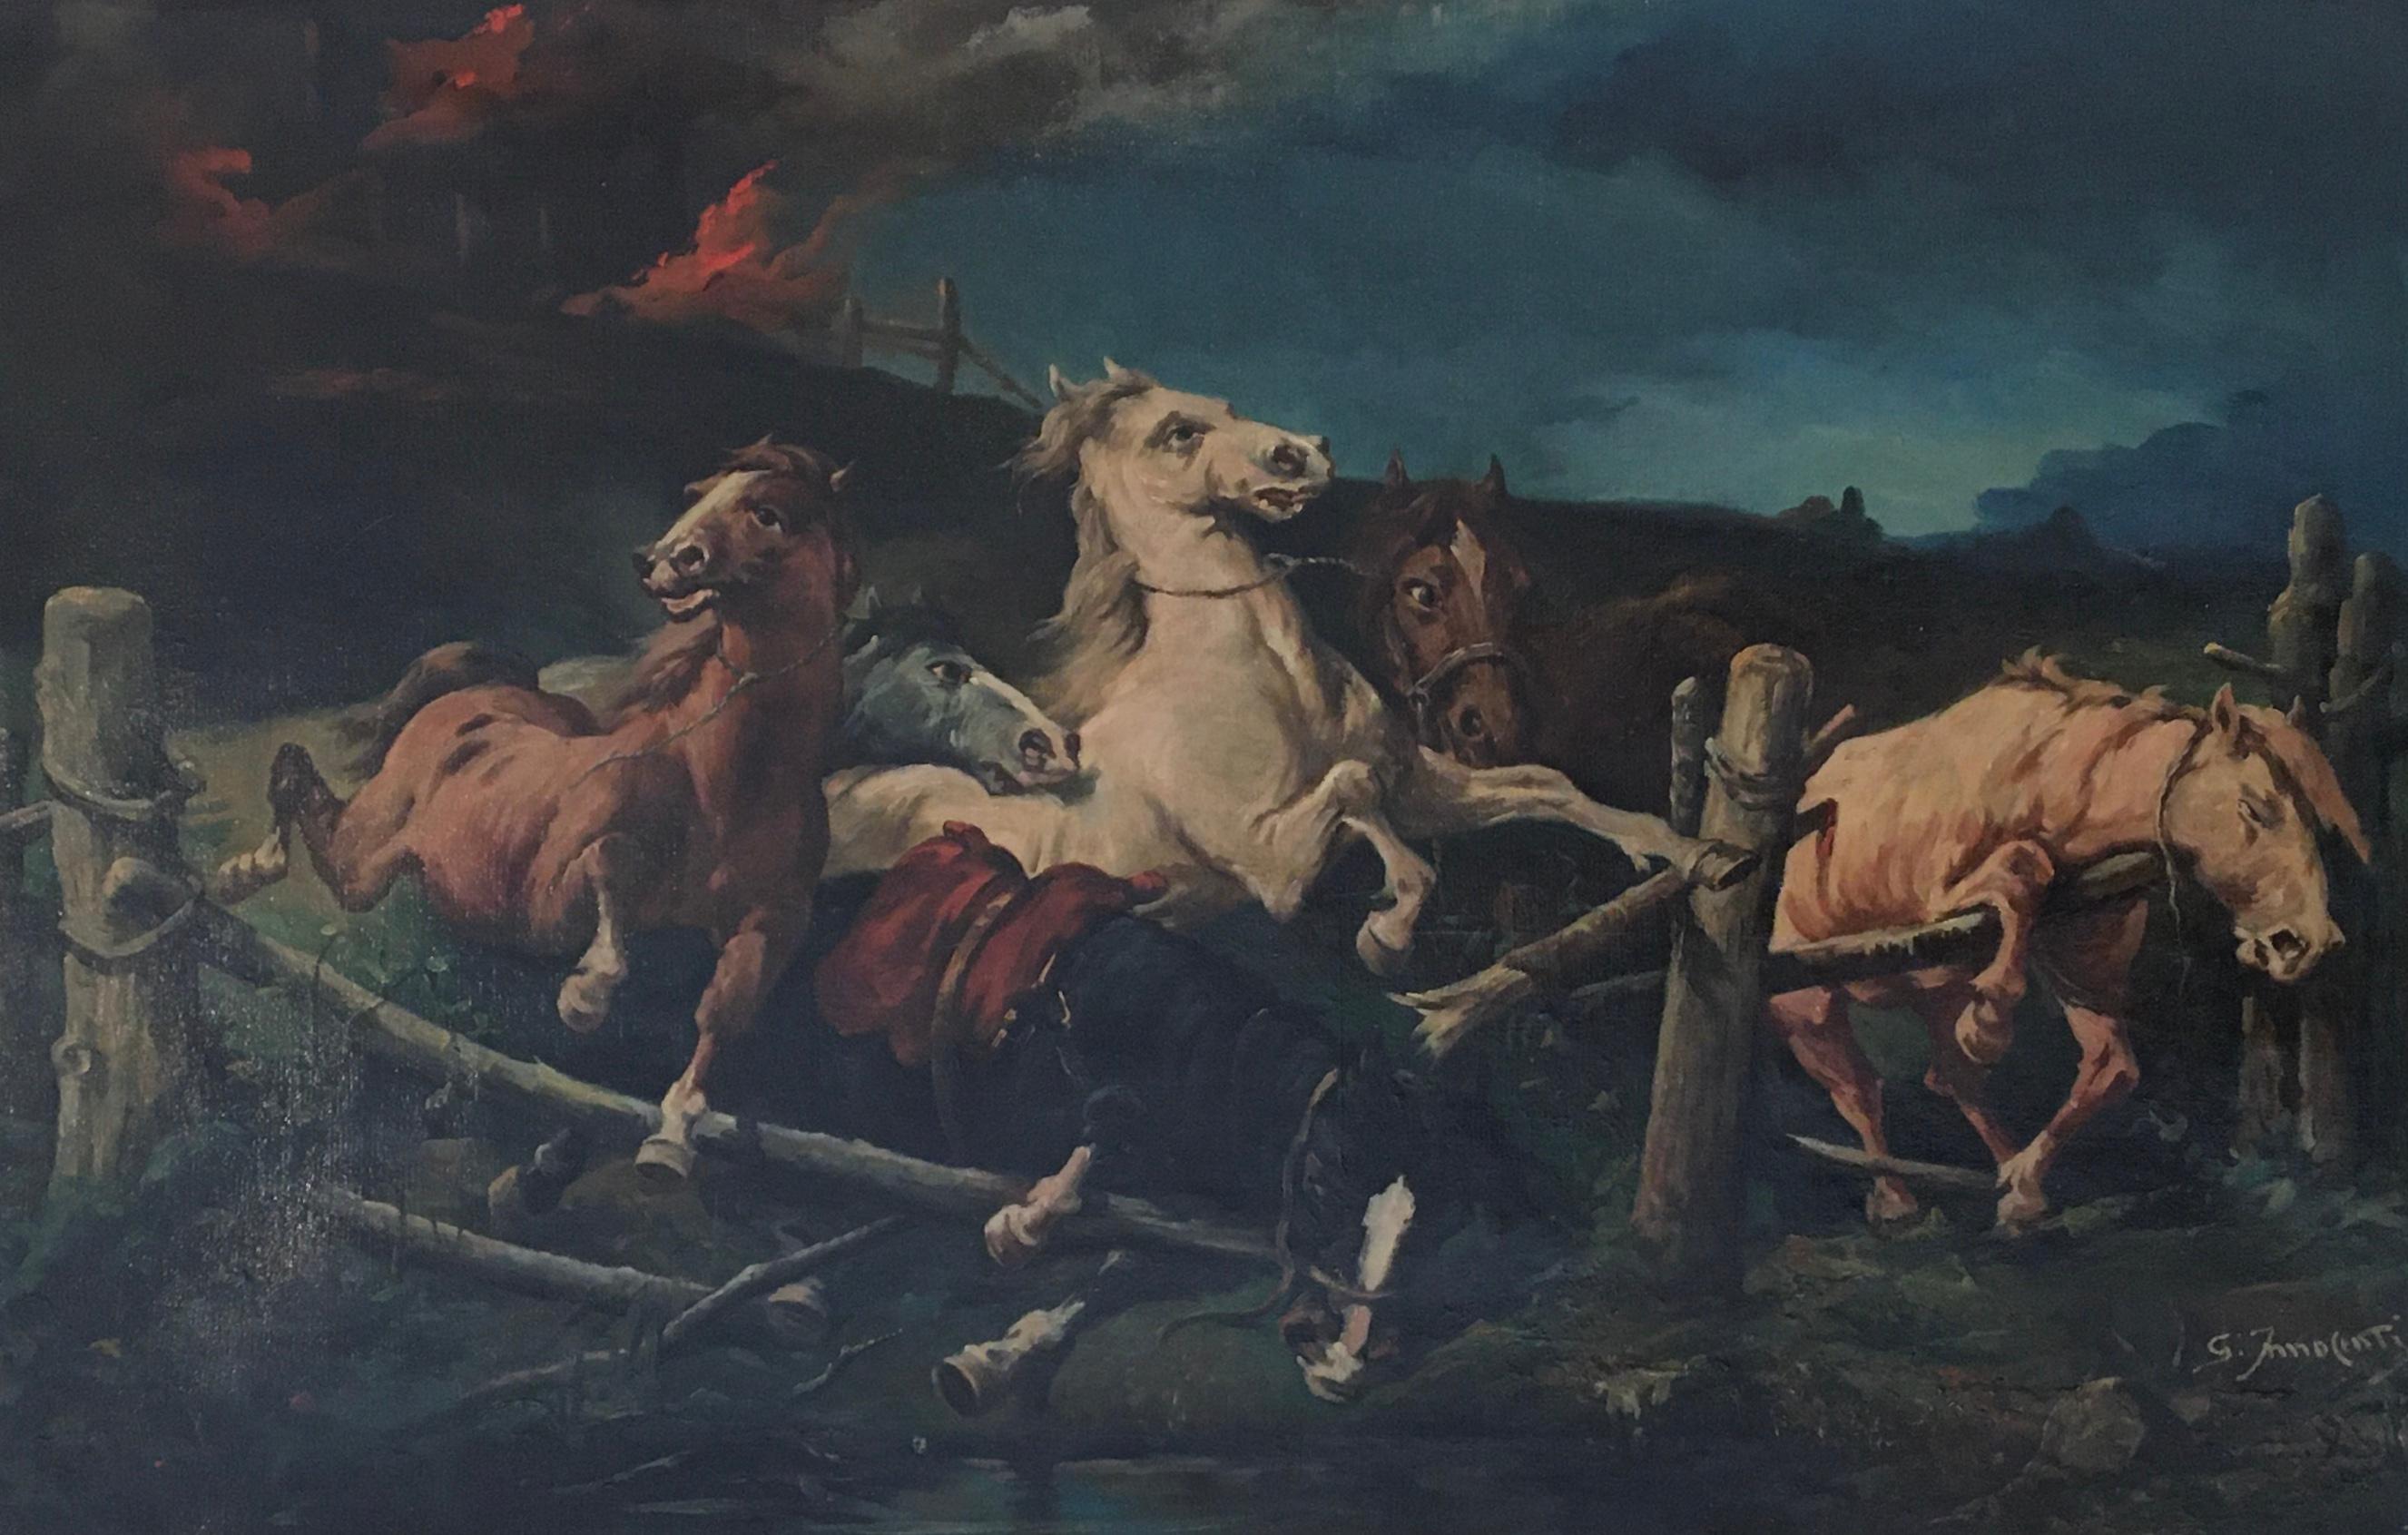 G. Innocente Landscape Painting - Horses panicked by fire